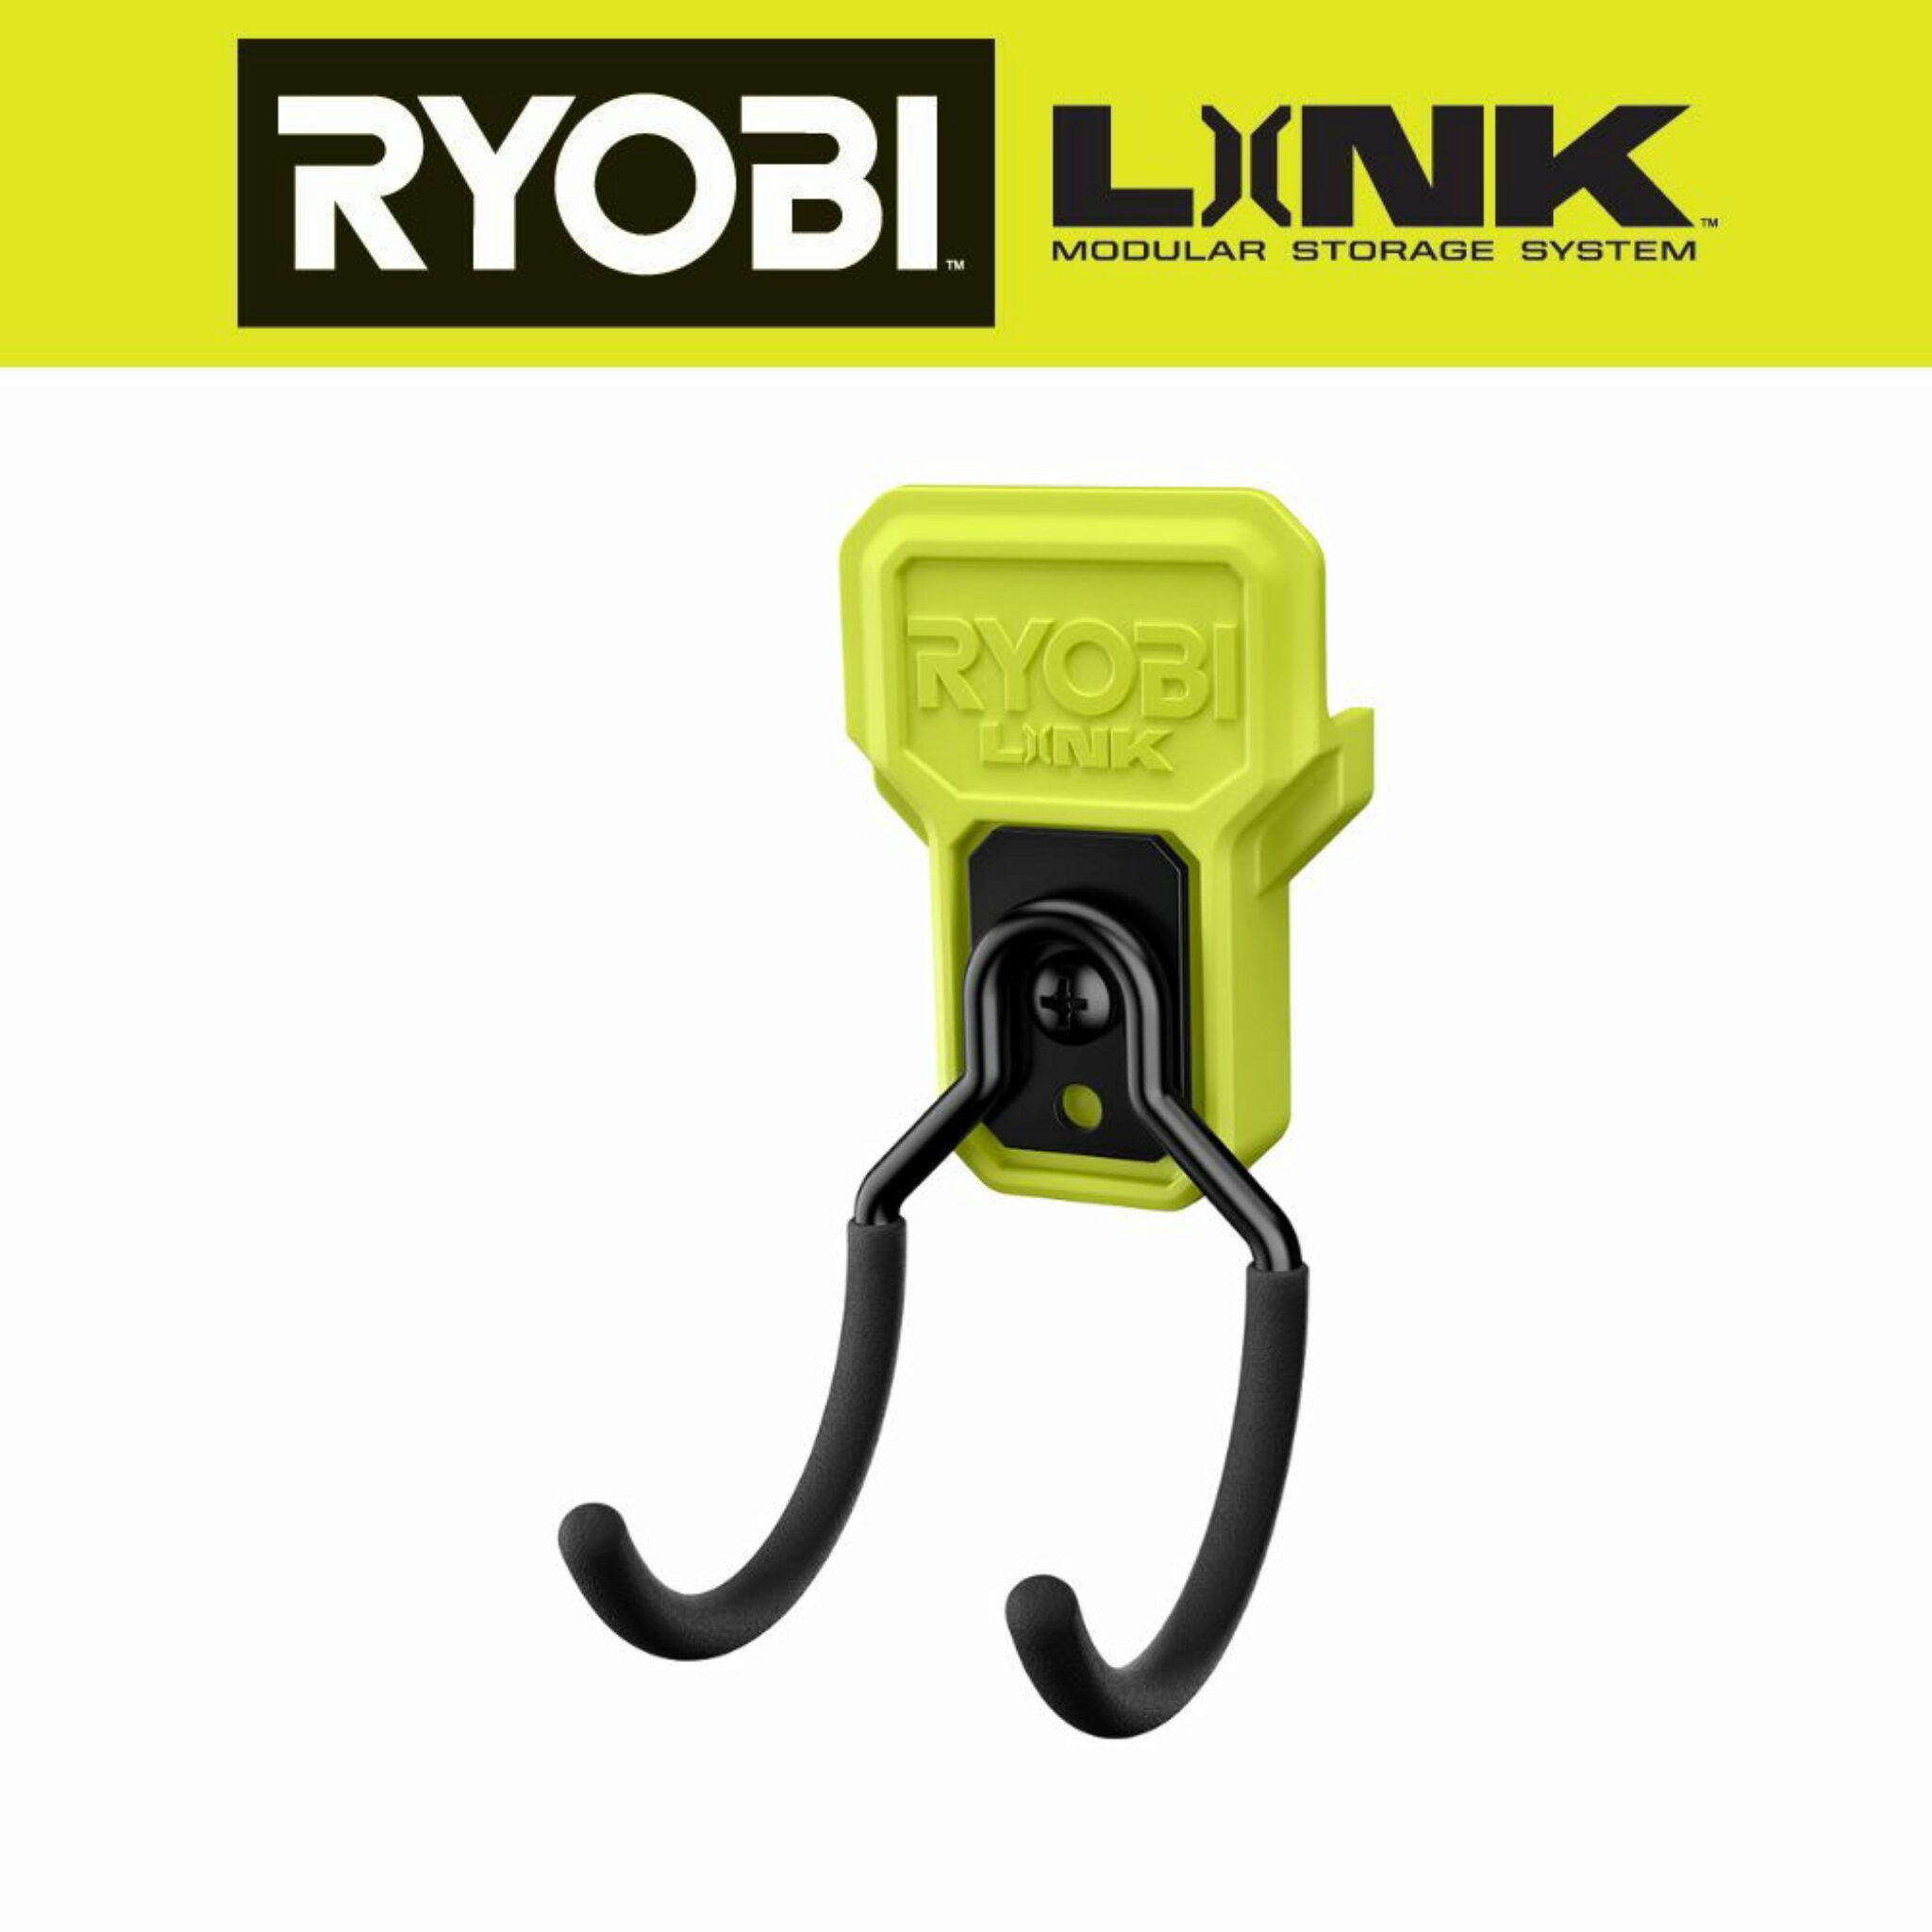 More Items Added To The Ryobi Link Modular Storage System